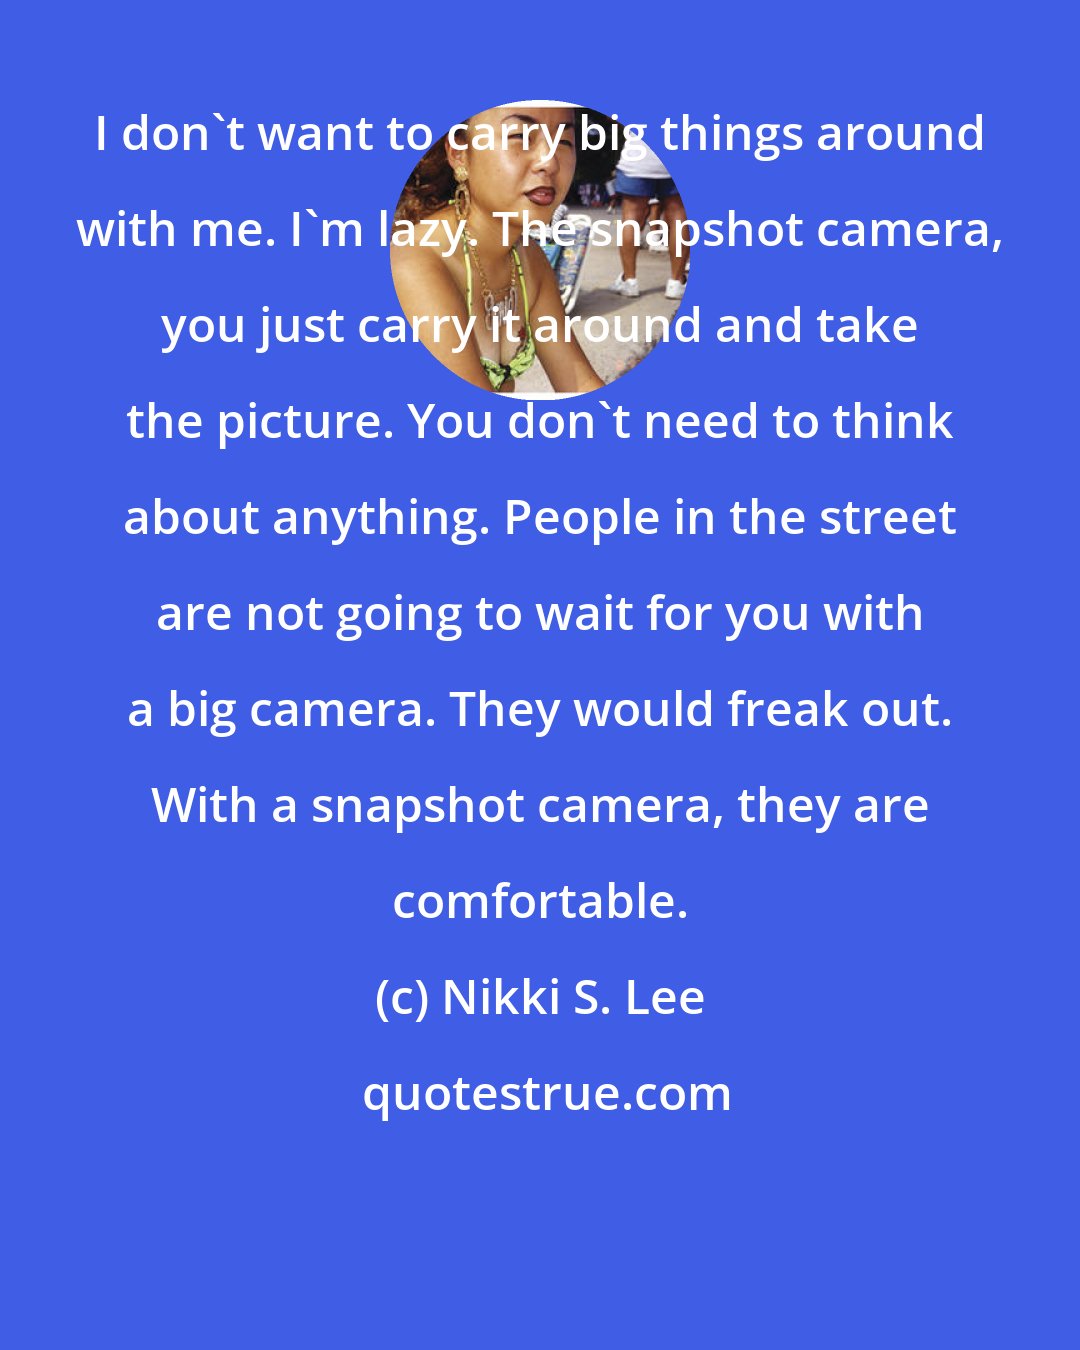 Nikki S. Lee: I don't want to carry big things around with me. I'm lazy. The snapshot camera, you just carry it around and take the picture. You don't need to think about anything. People in the street are not going to wait for you with a big camera. They would freak out. With a snapshot camera, they are comfortable.